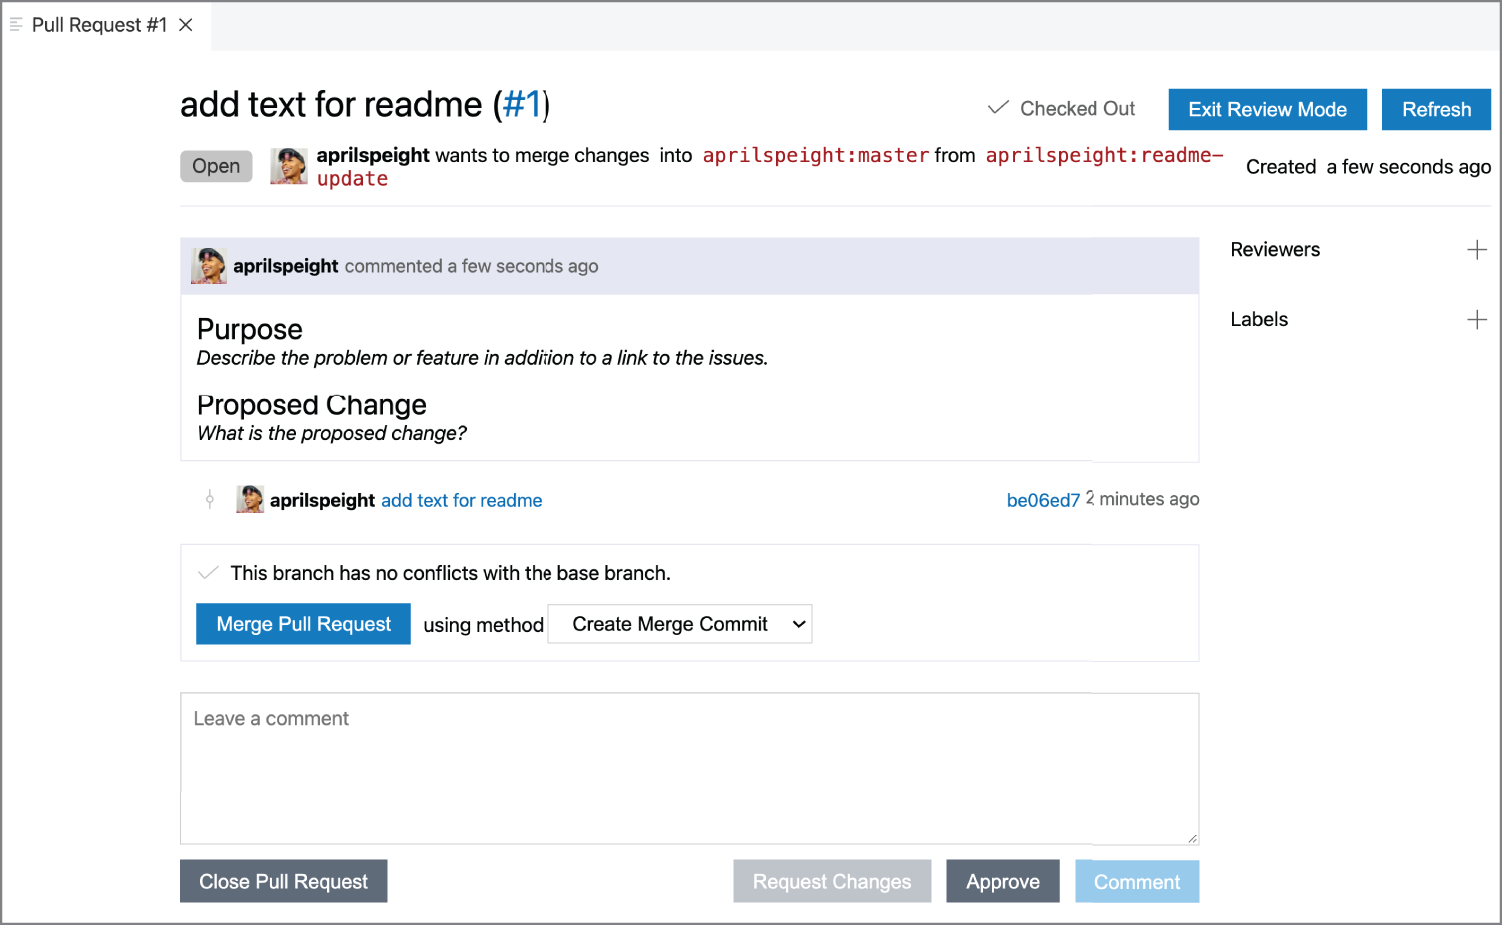 Snapshot of the pull request opens in a new Pull Request tab in the editor. You can manage the pull request in Visual Studio Code using the same features available on GitHub.